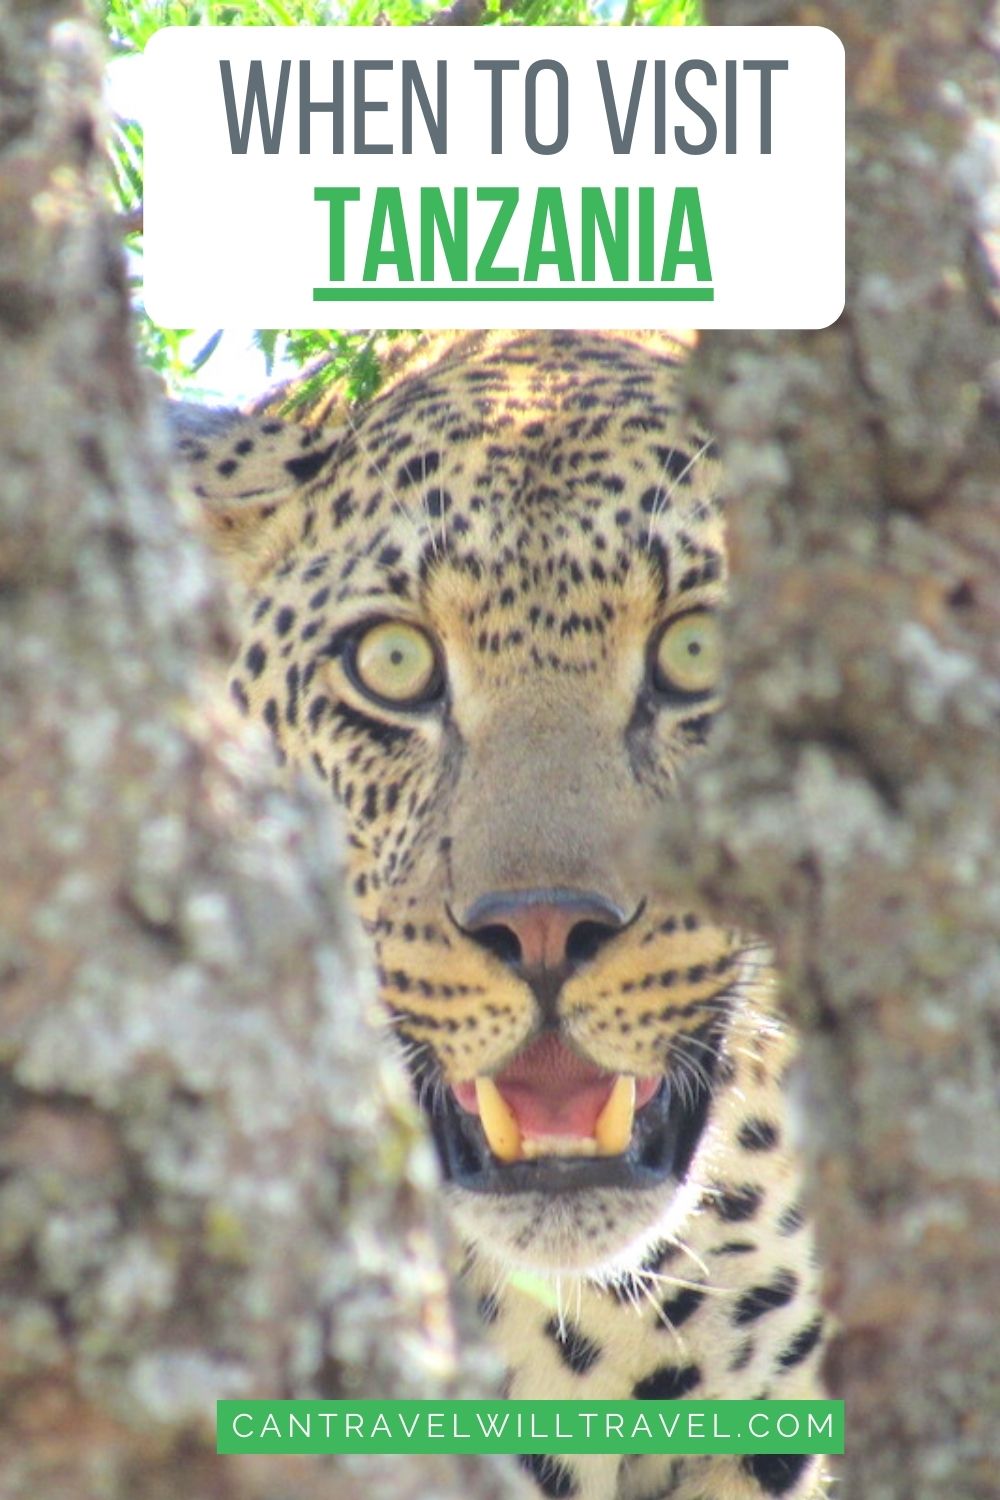 When to Visit Tanzania in Africa